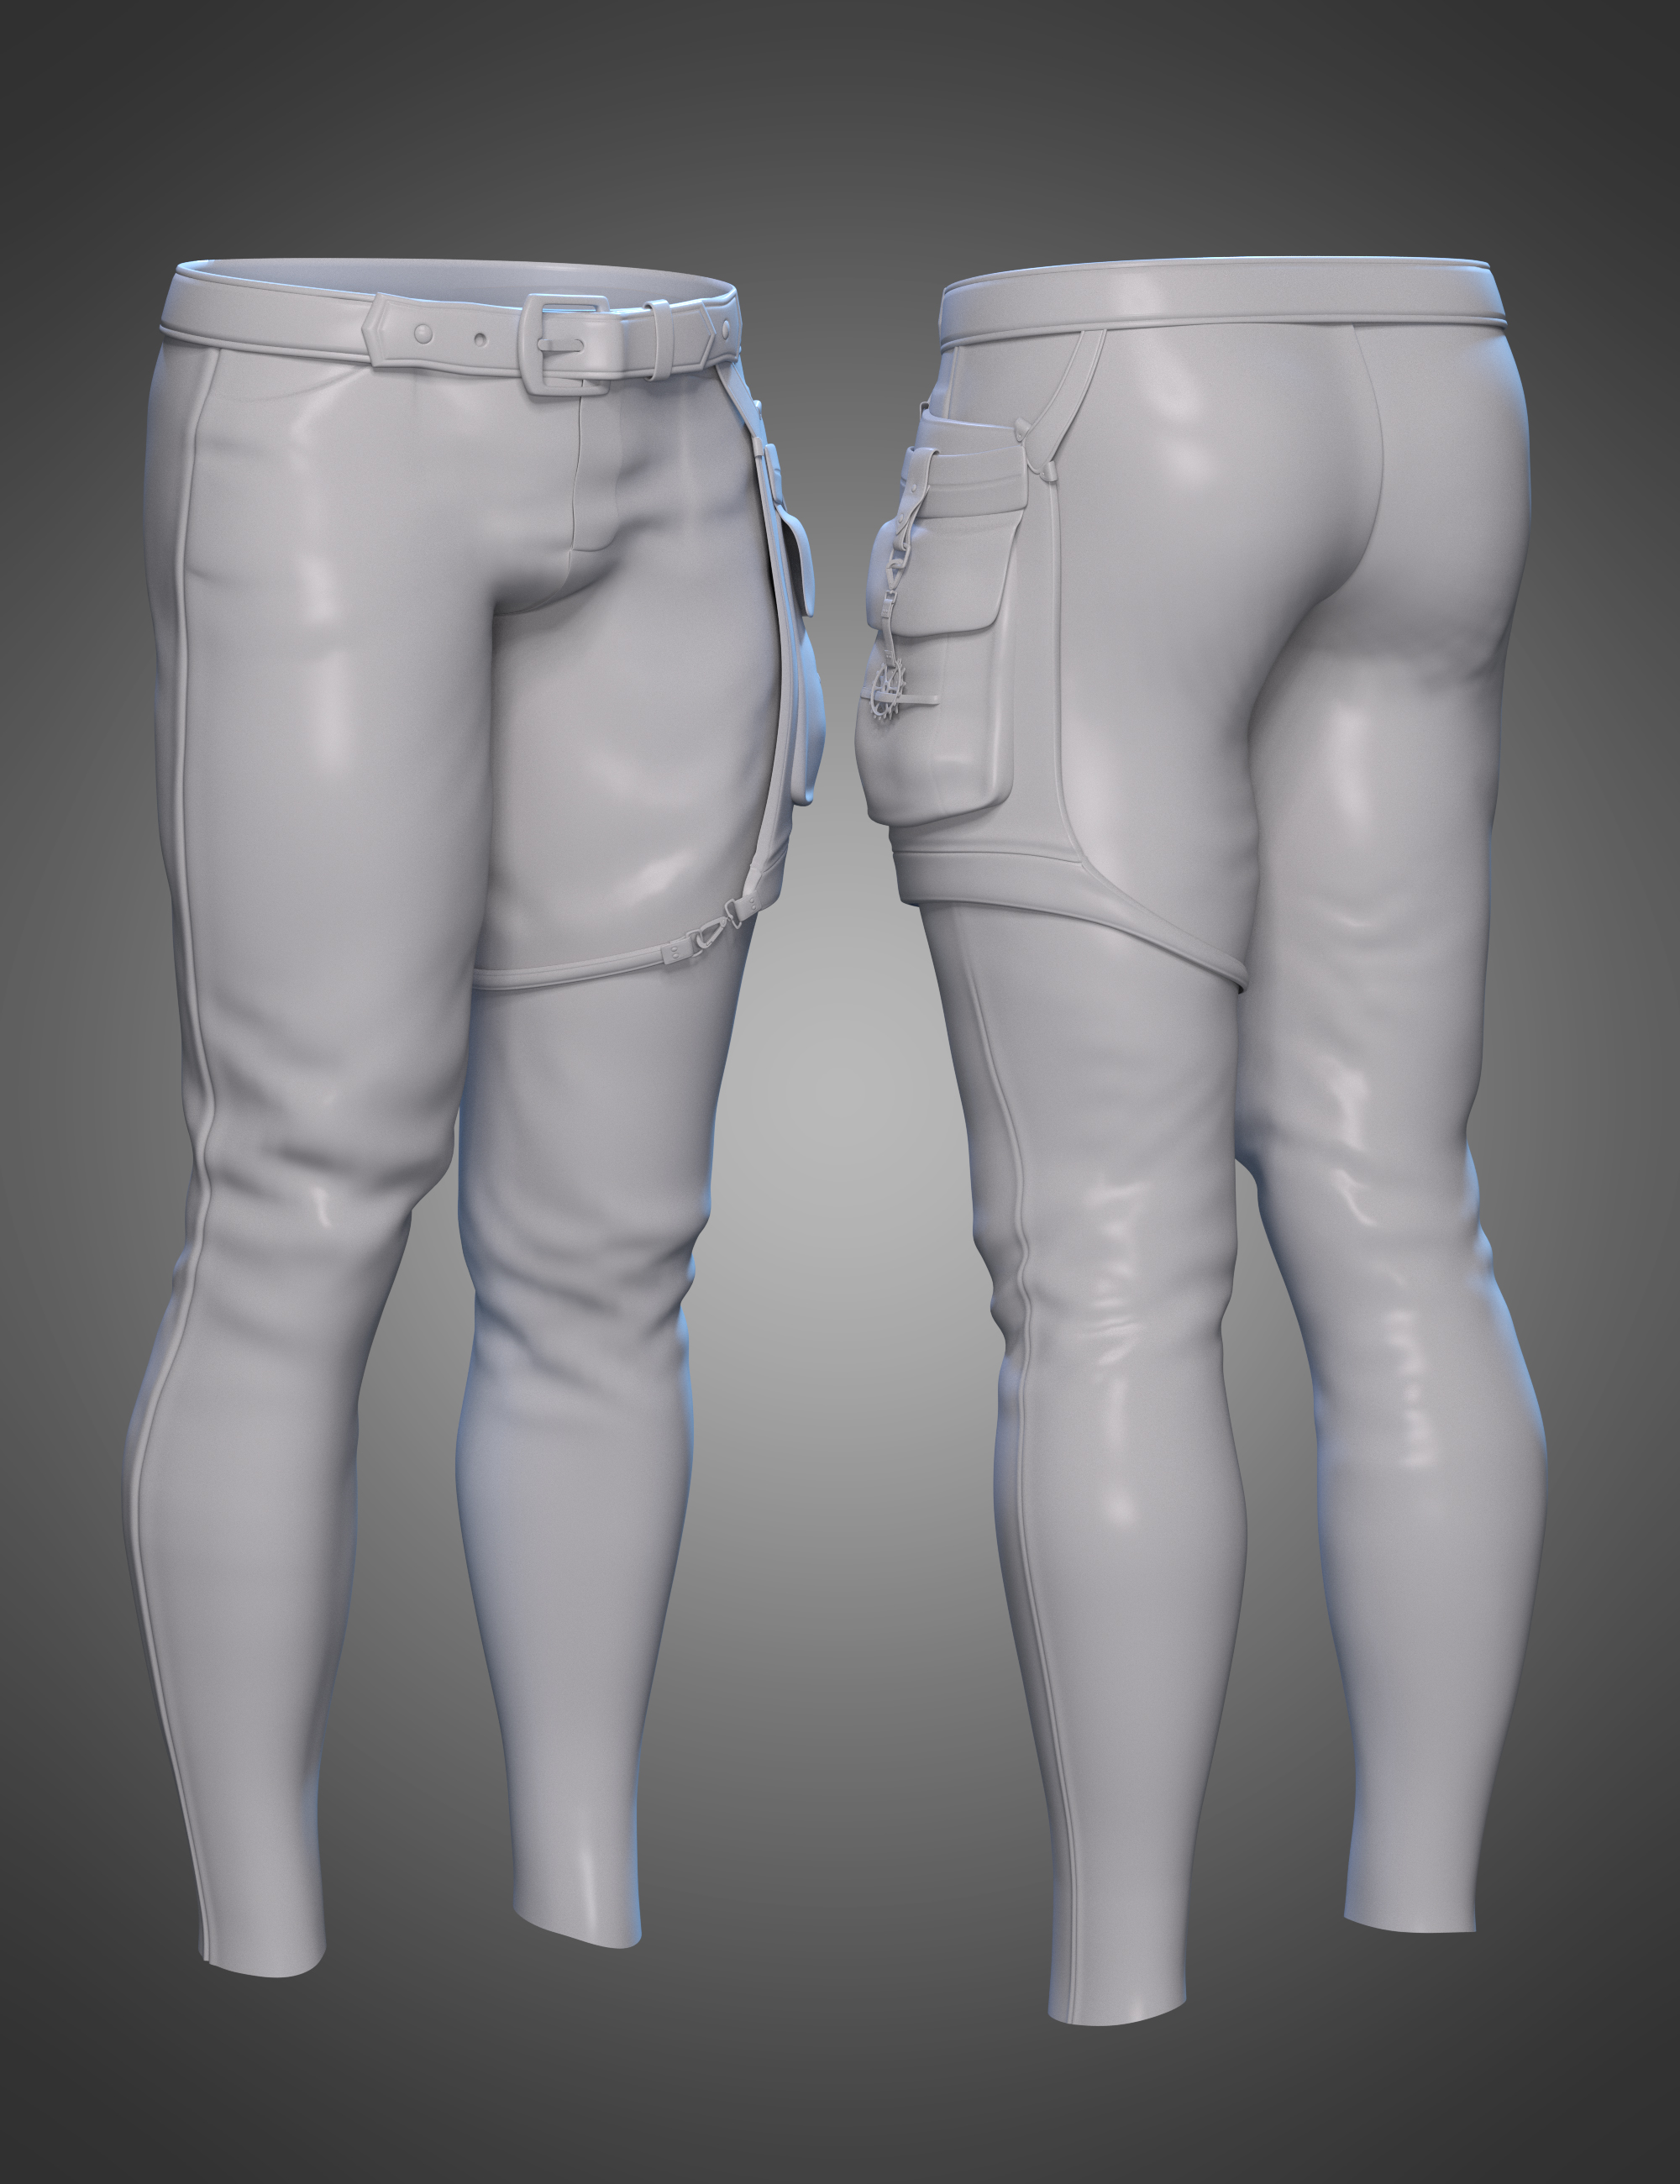 Halcyon Fragment Pants for Genesis 8 and 8.1 Males | Daz 3D